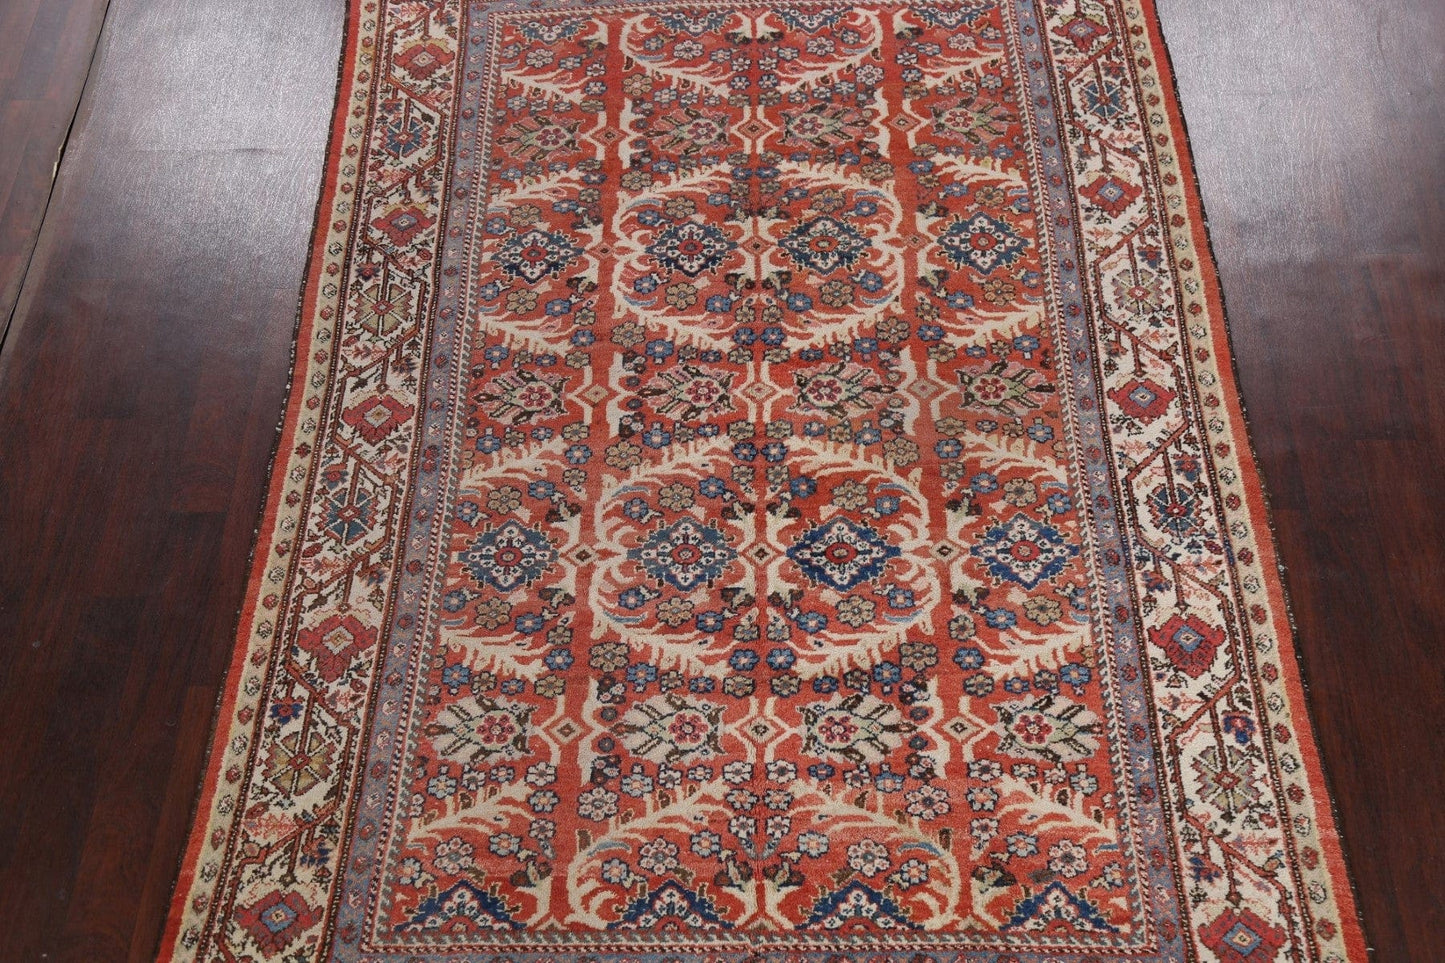 Antique Vegetable Dye Floral Mahal Persian Area Rug 7x10